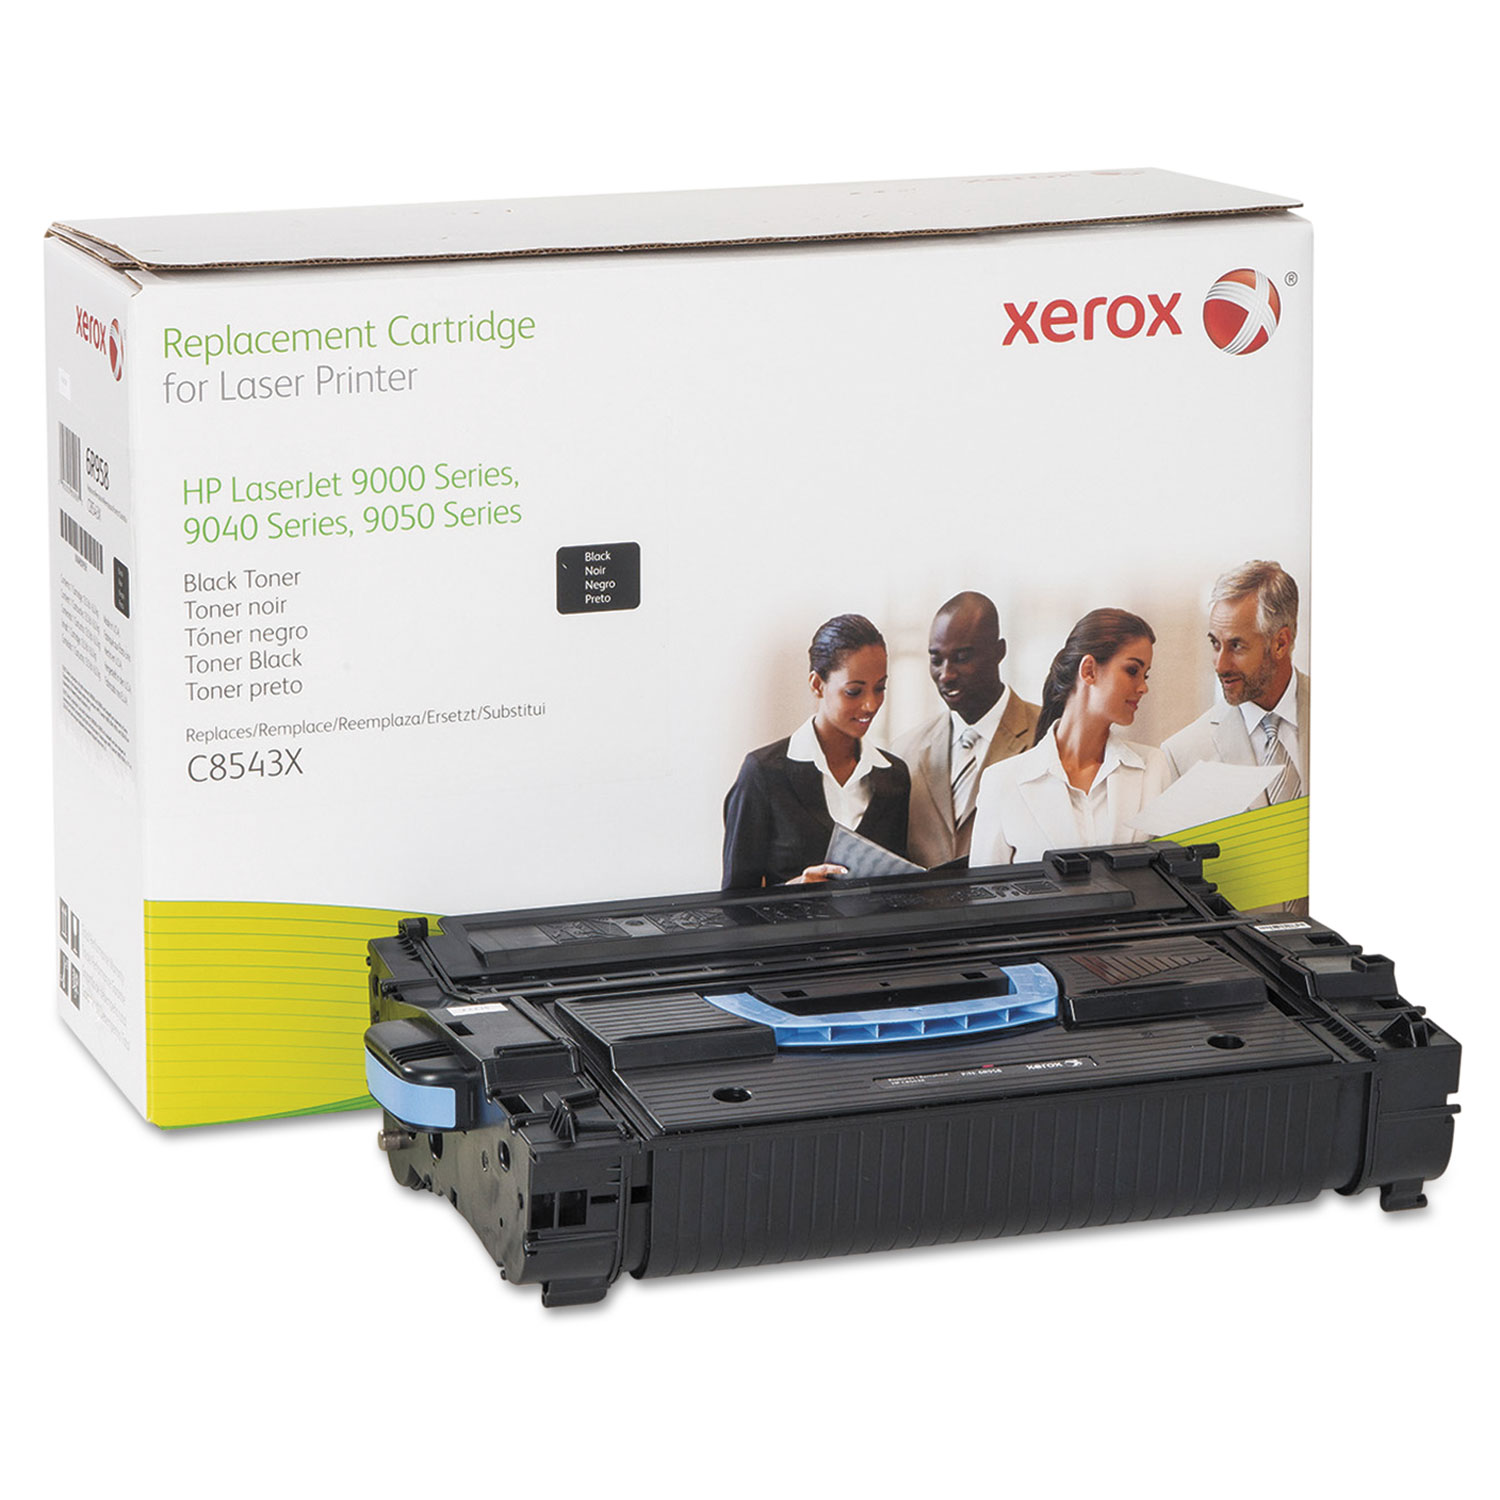  Xerox 006R00958 006R00958 Replacement High-Yield Toner for C8543X (43X), 33500 Page Yield, Black (XER006R00958) 